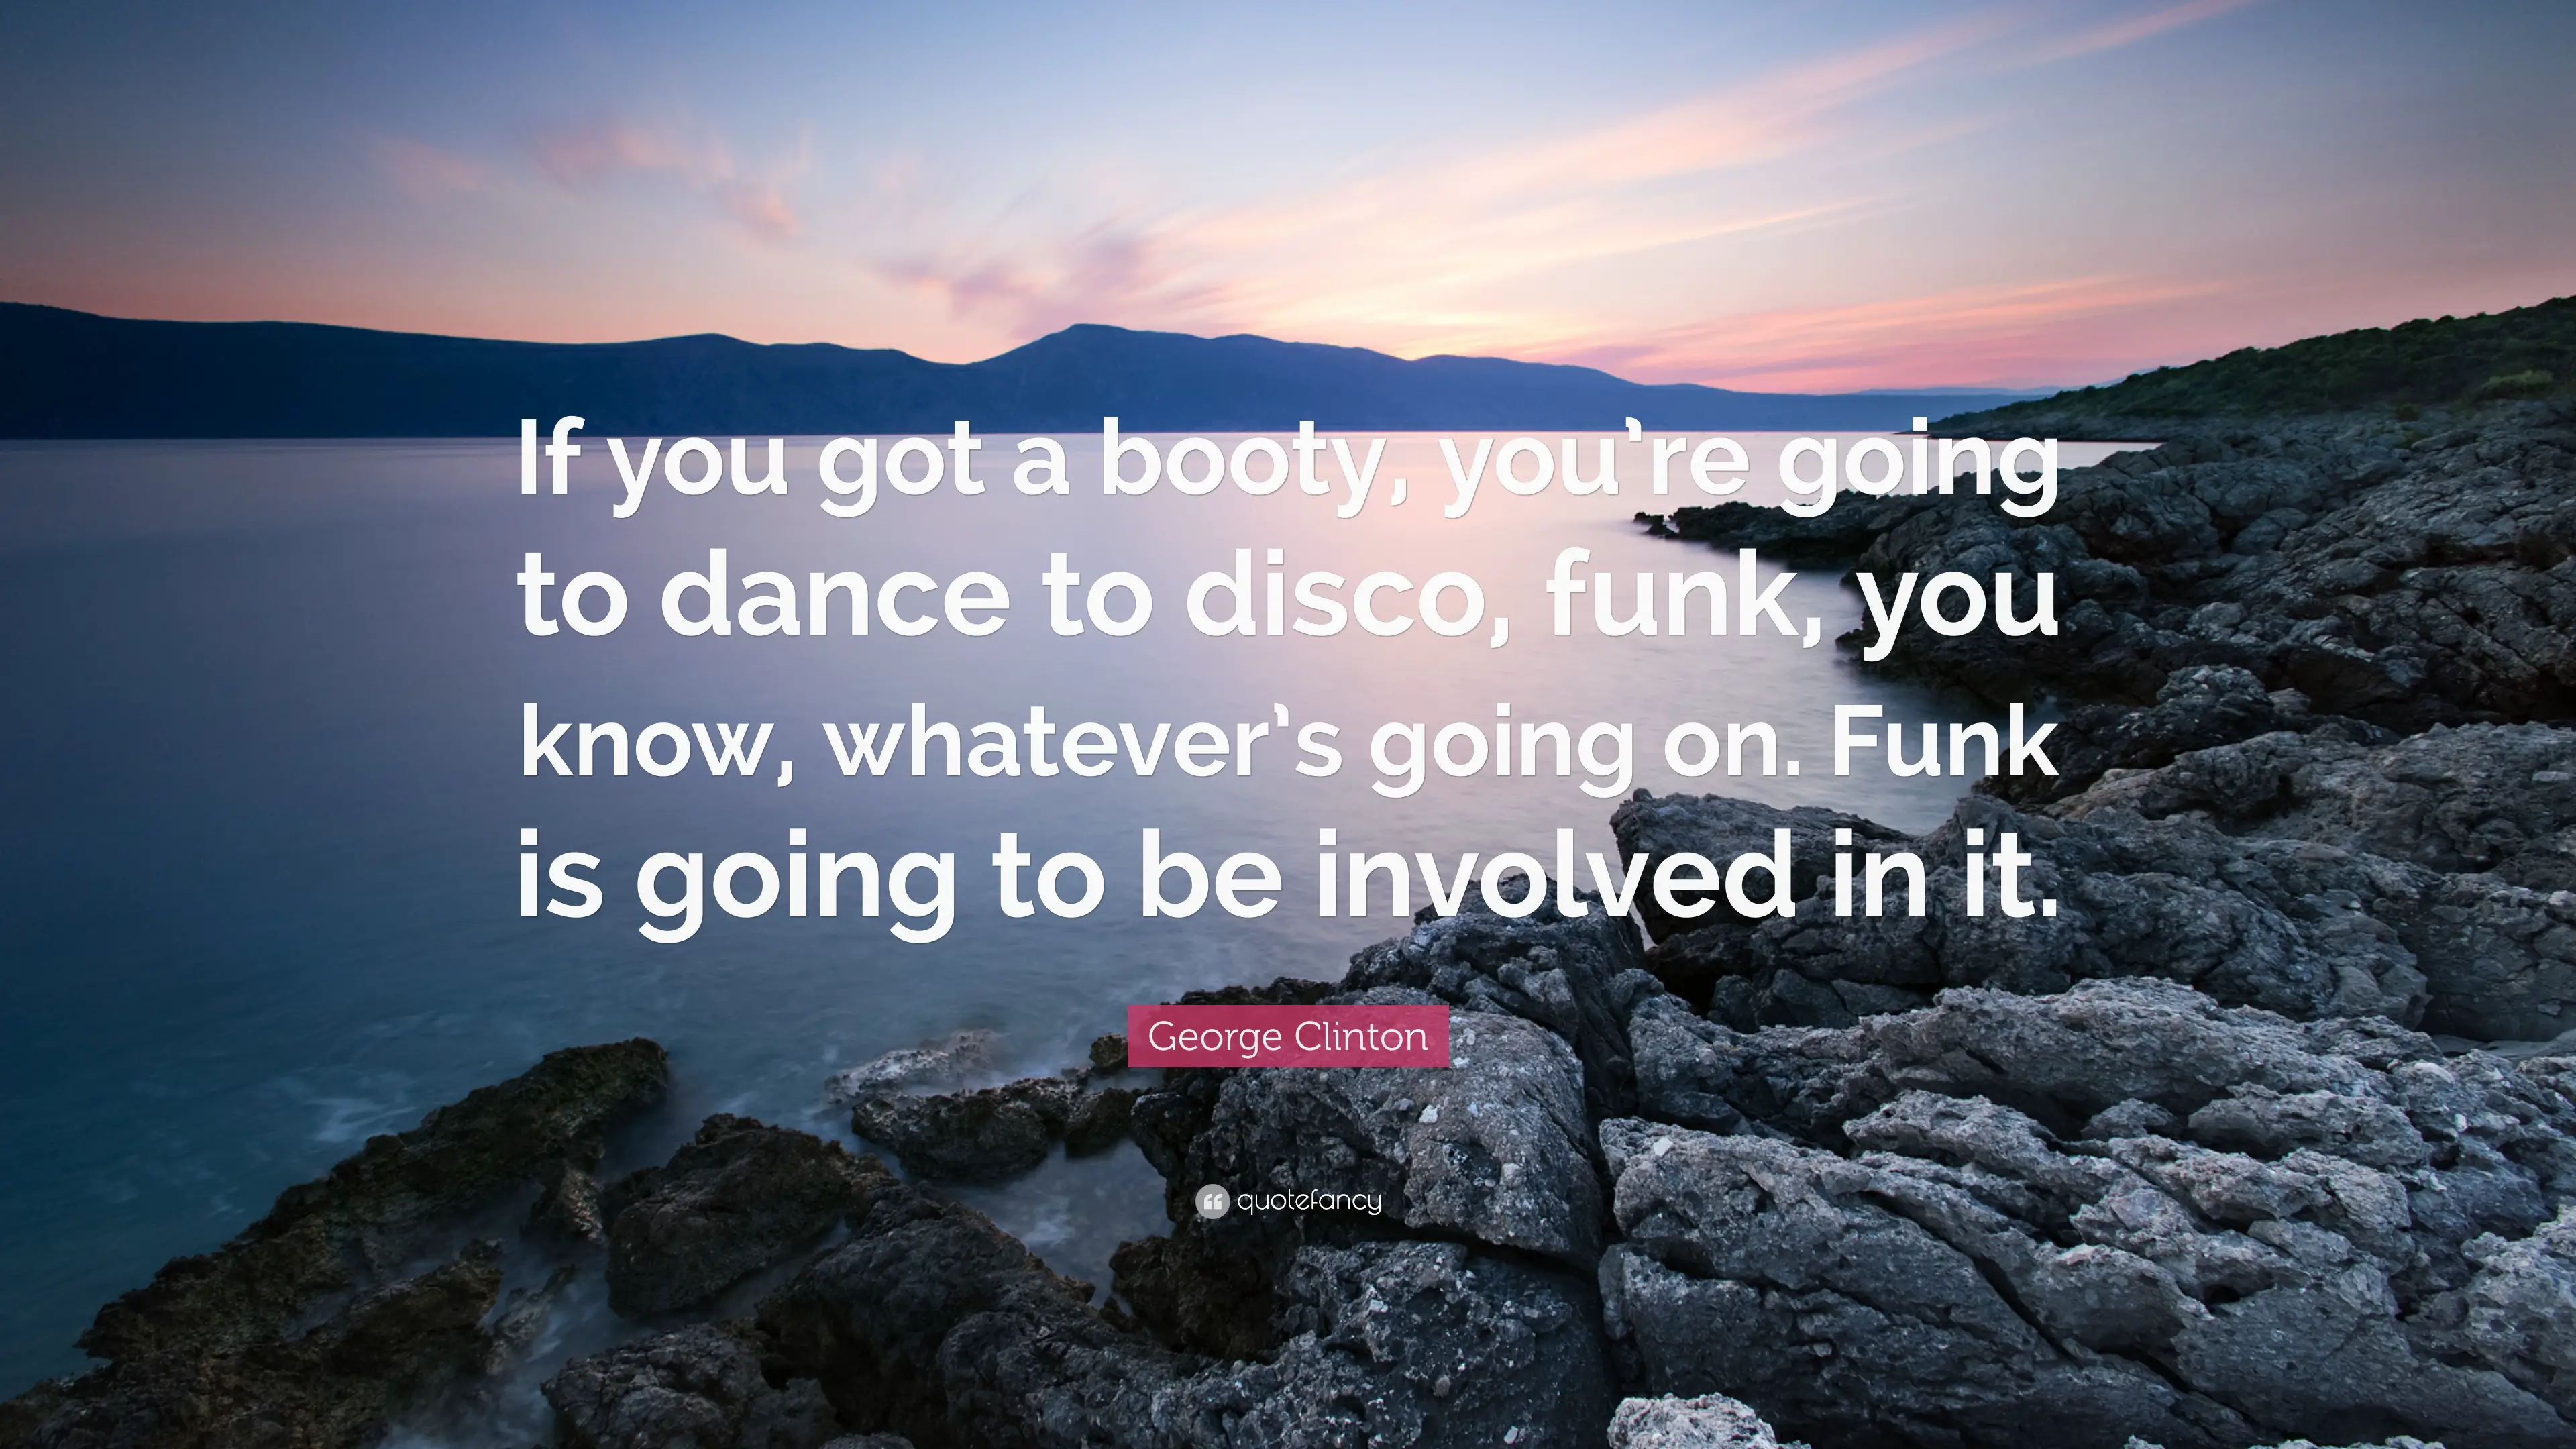 8 Inspirational George Clinton Quotes